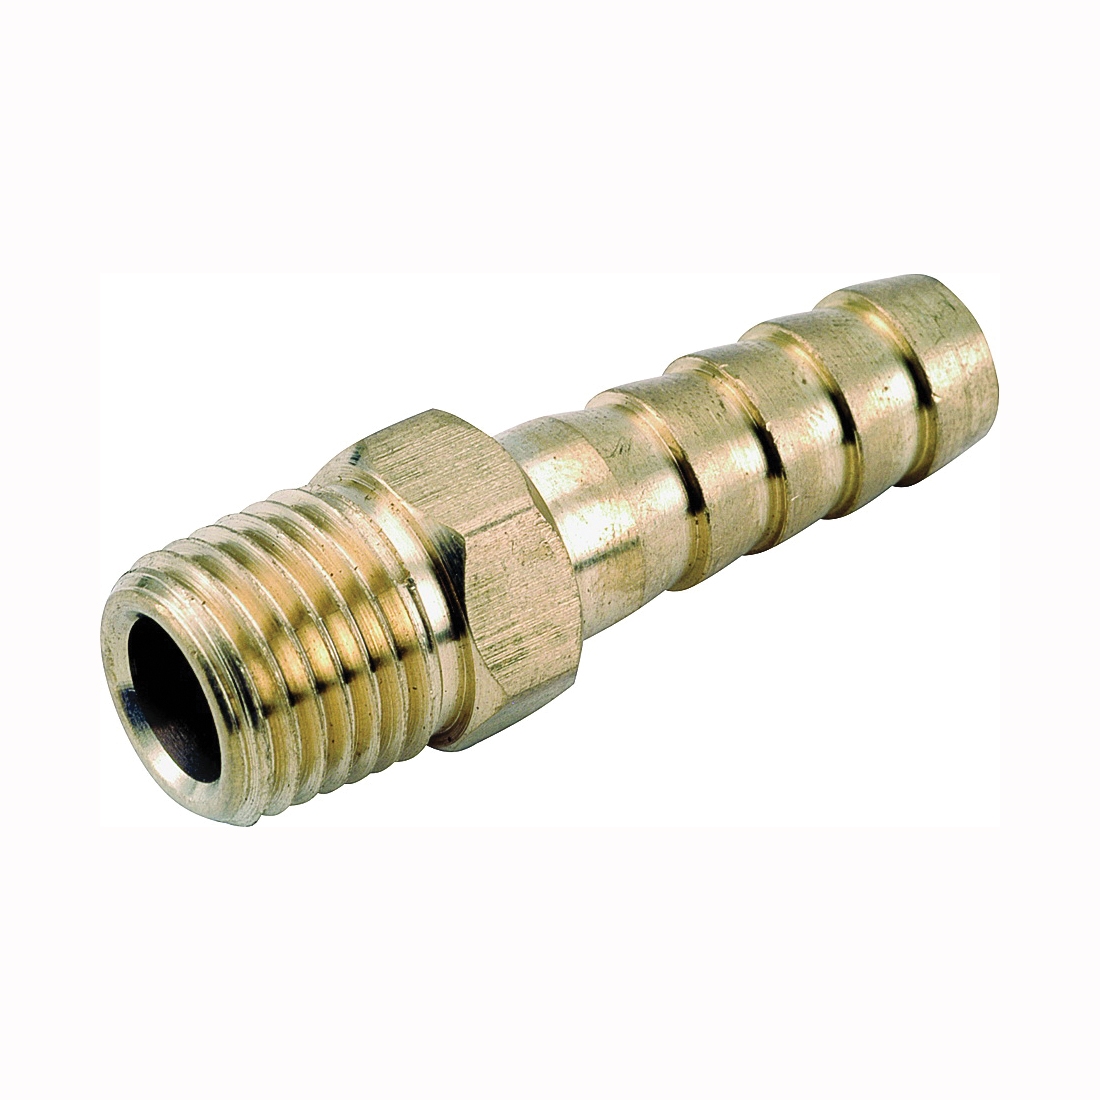 129 Series 757001-0402 Hose Adapter, 1/4 in, Barb, 1/8 in, MPT, Brass